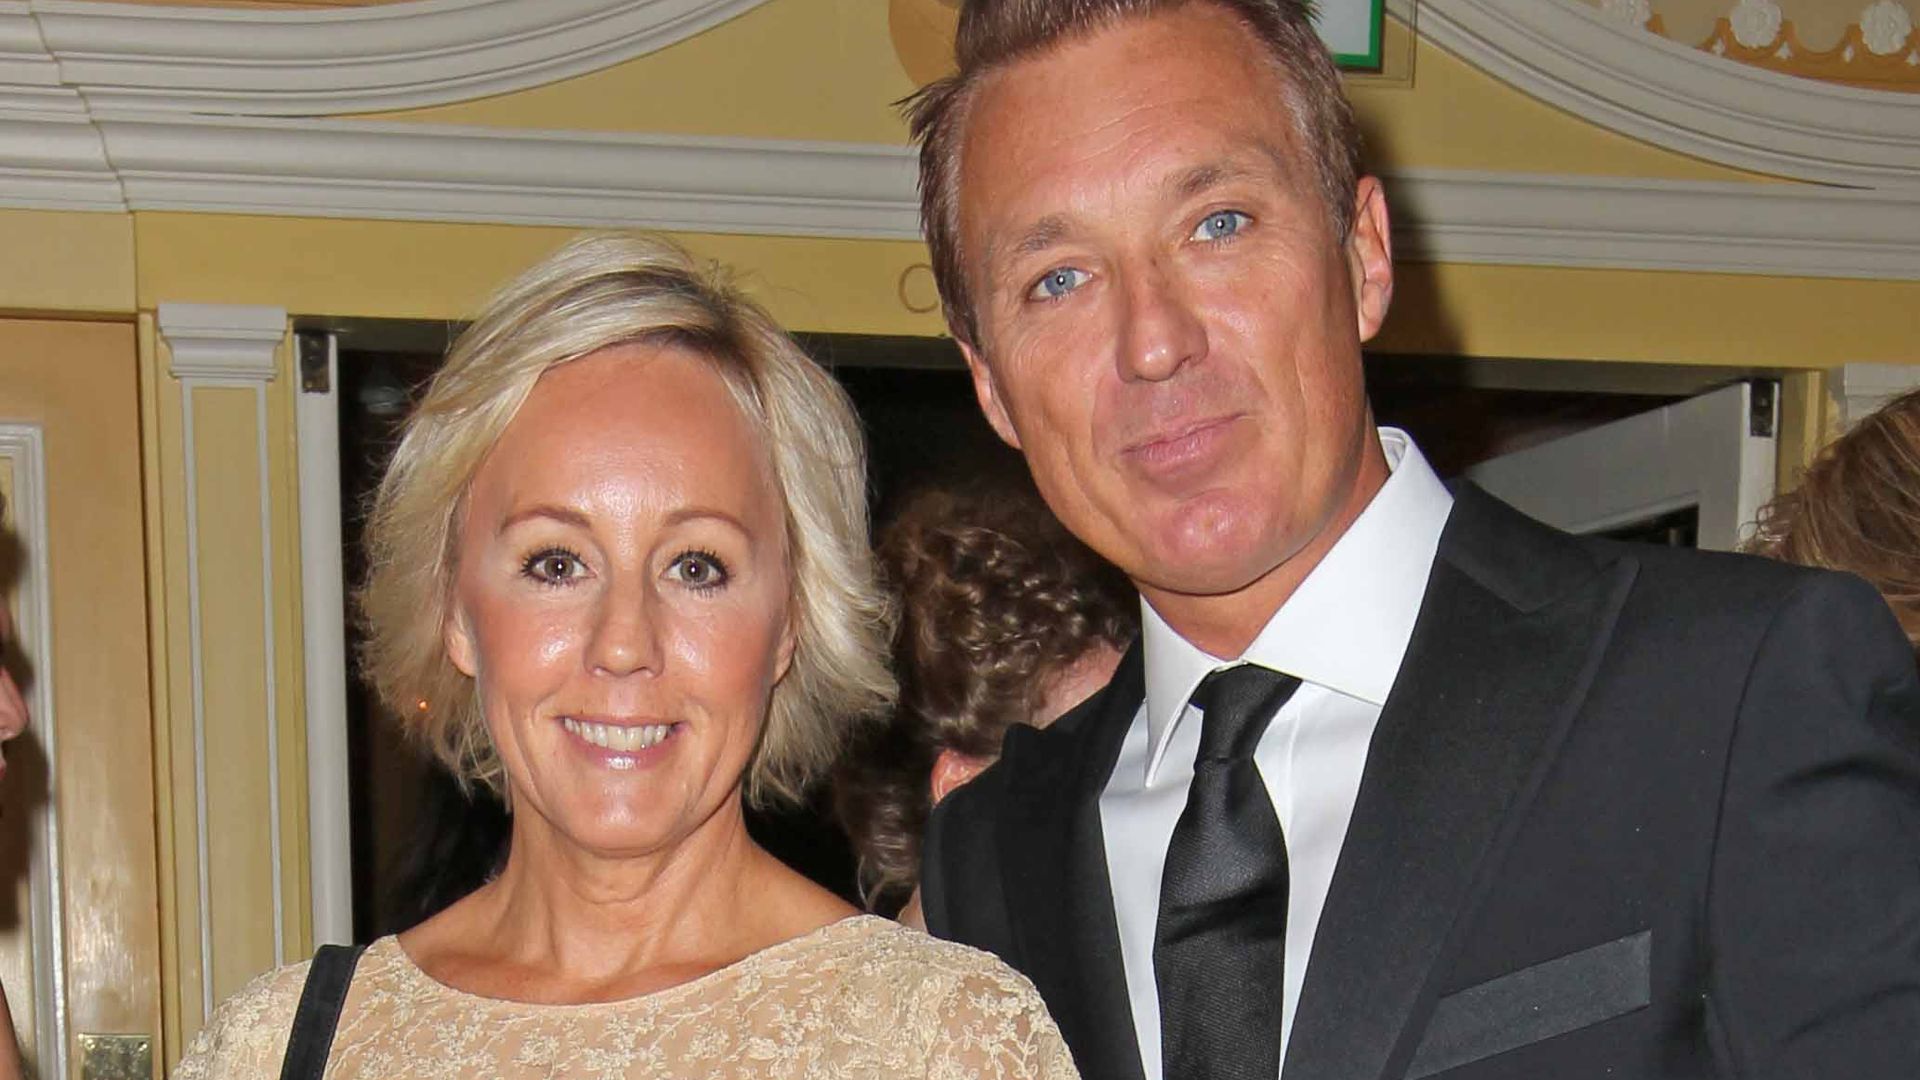 Martin Kemp in a black suit and Shirlie Holliman in a cream and black lace dress